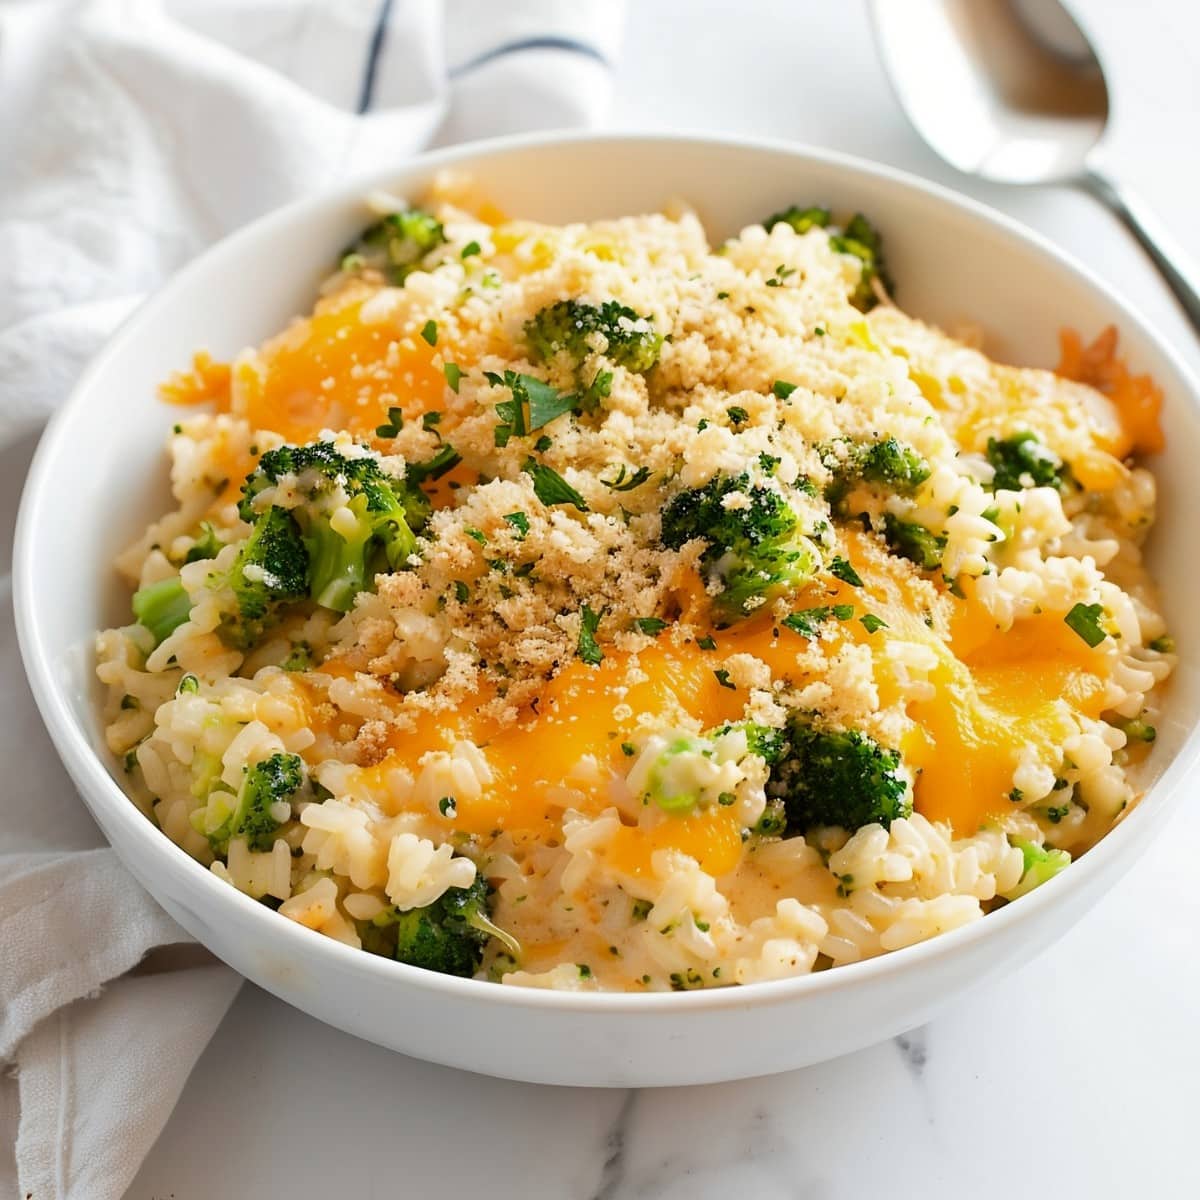 Delicious broccoli rice casserole served in a bowl, a comforting and nutritious side dish for any meal